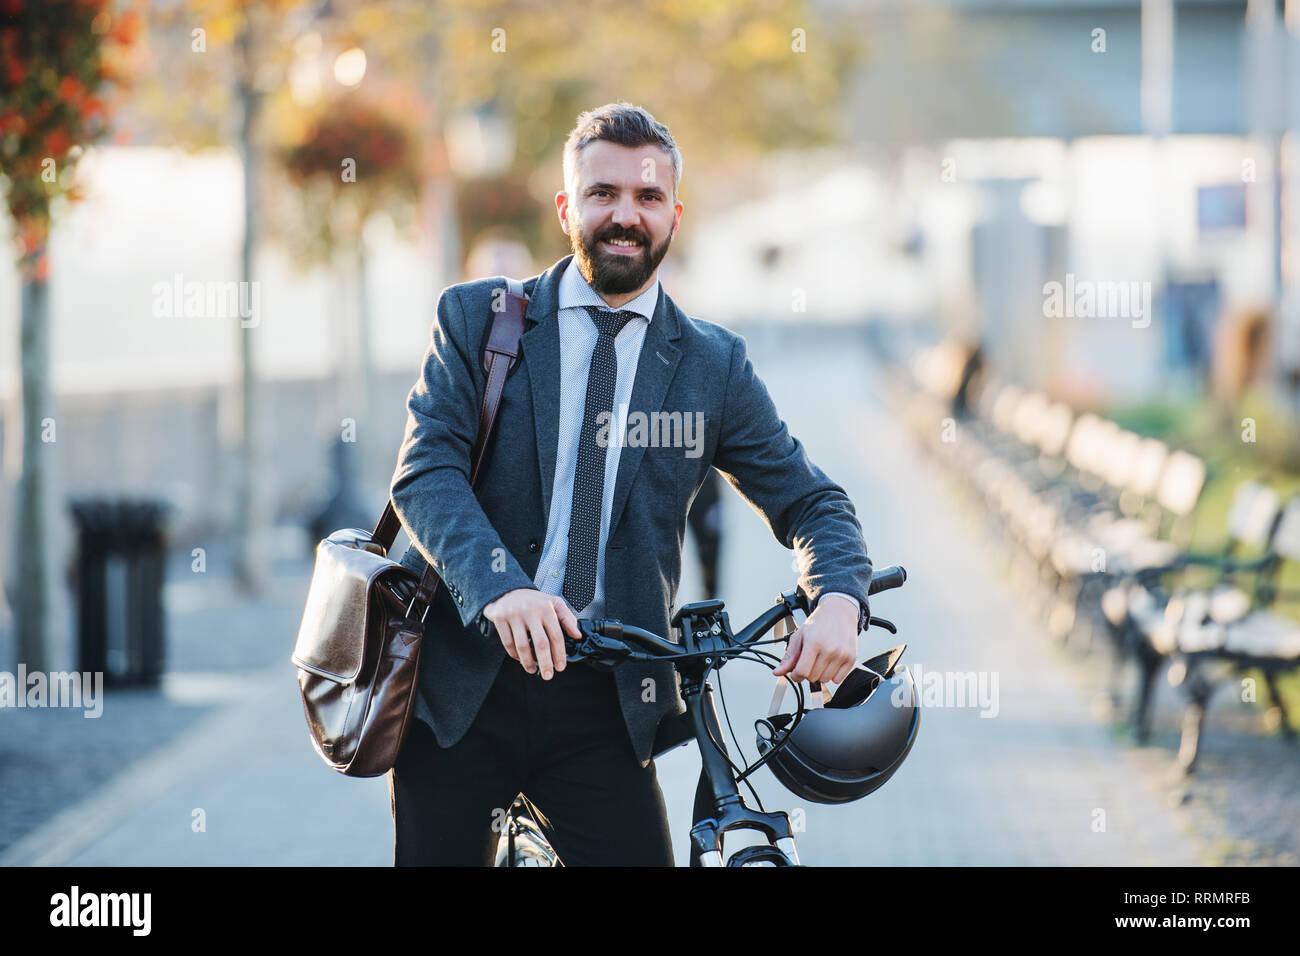 A businessman commuter with bicycle walking home from work in city. Stock Photo